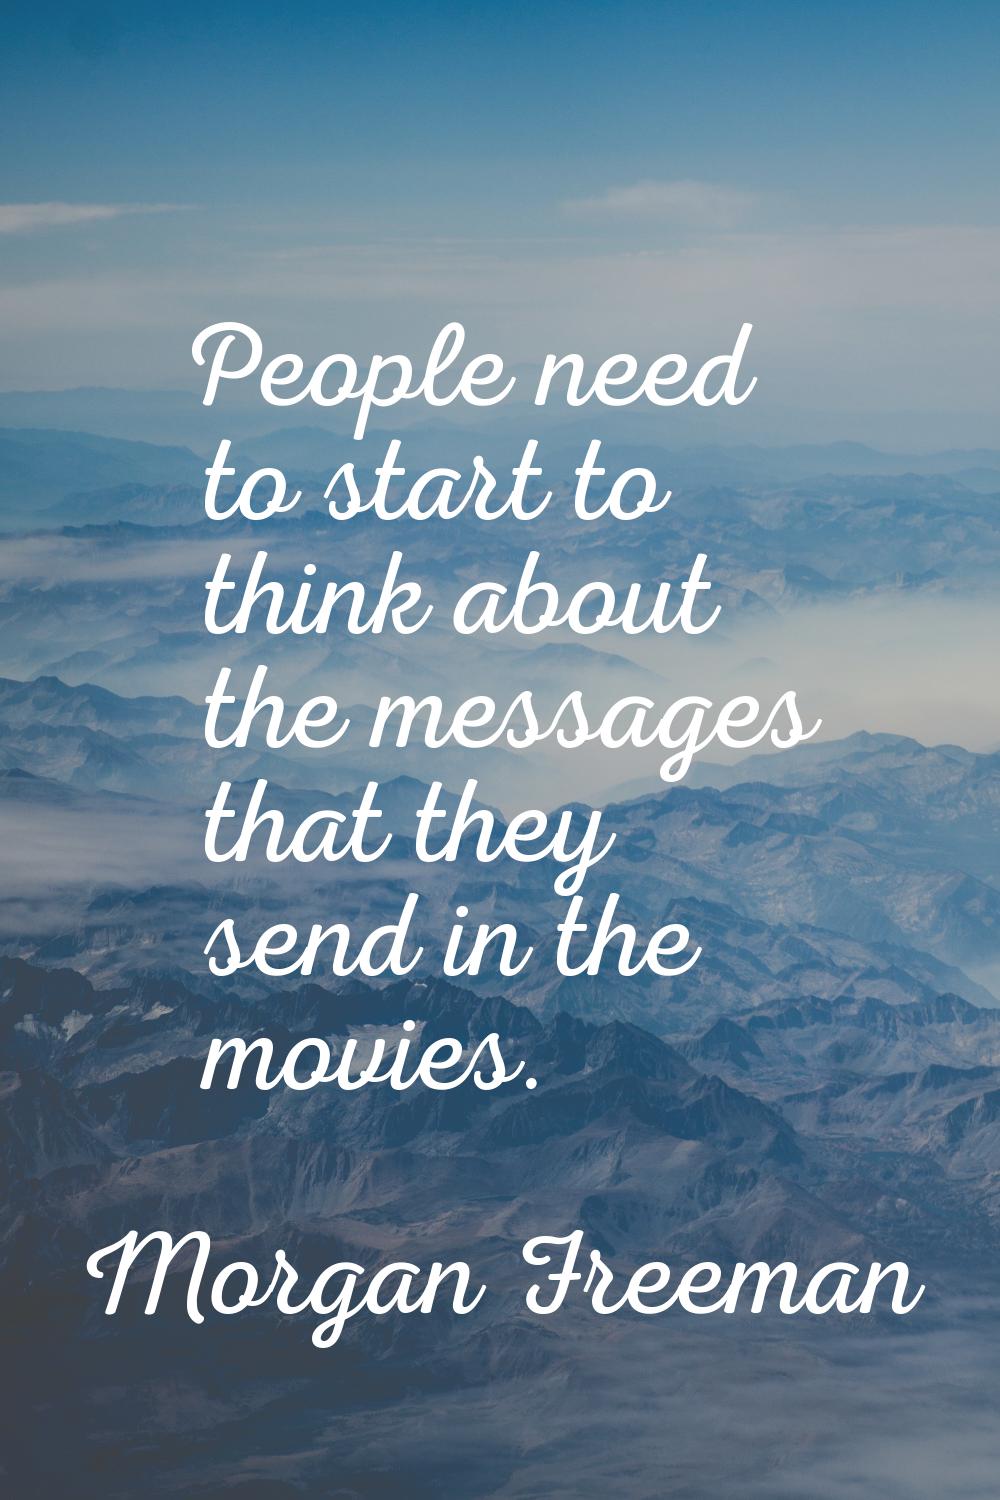 People need to start to think about the messages that they send in the movies.